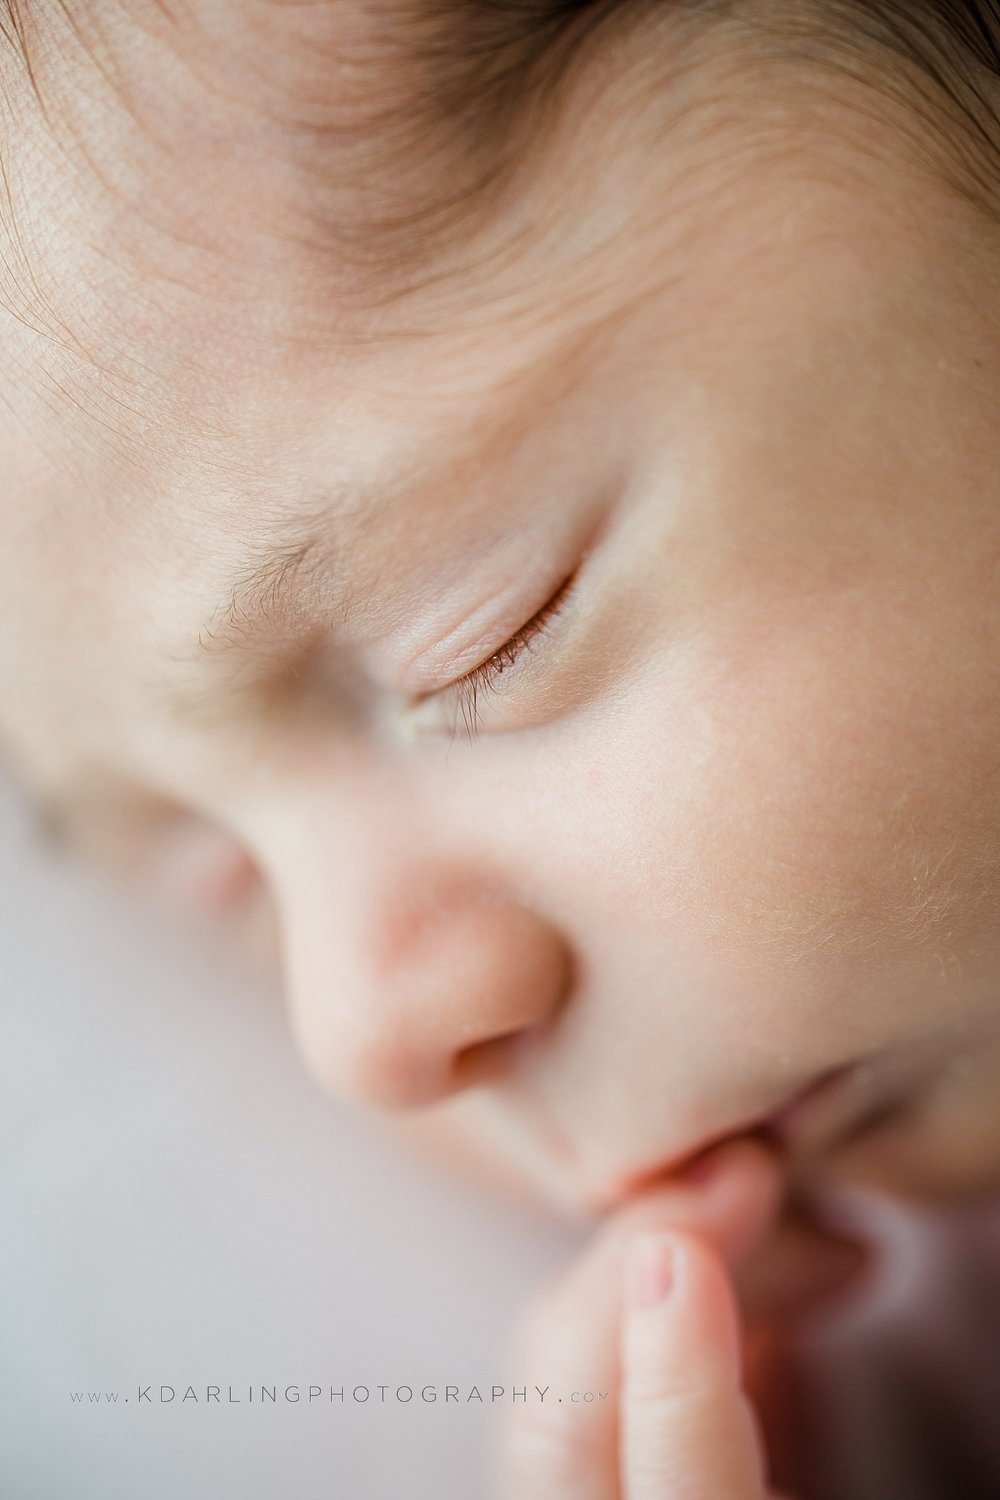 Newborn baby boy profile fingers in mouth